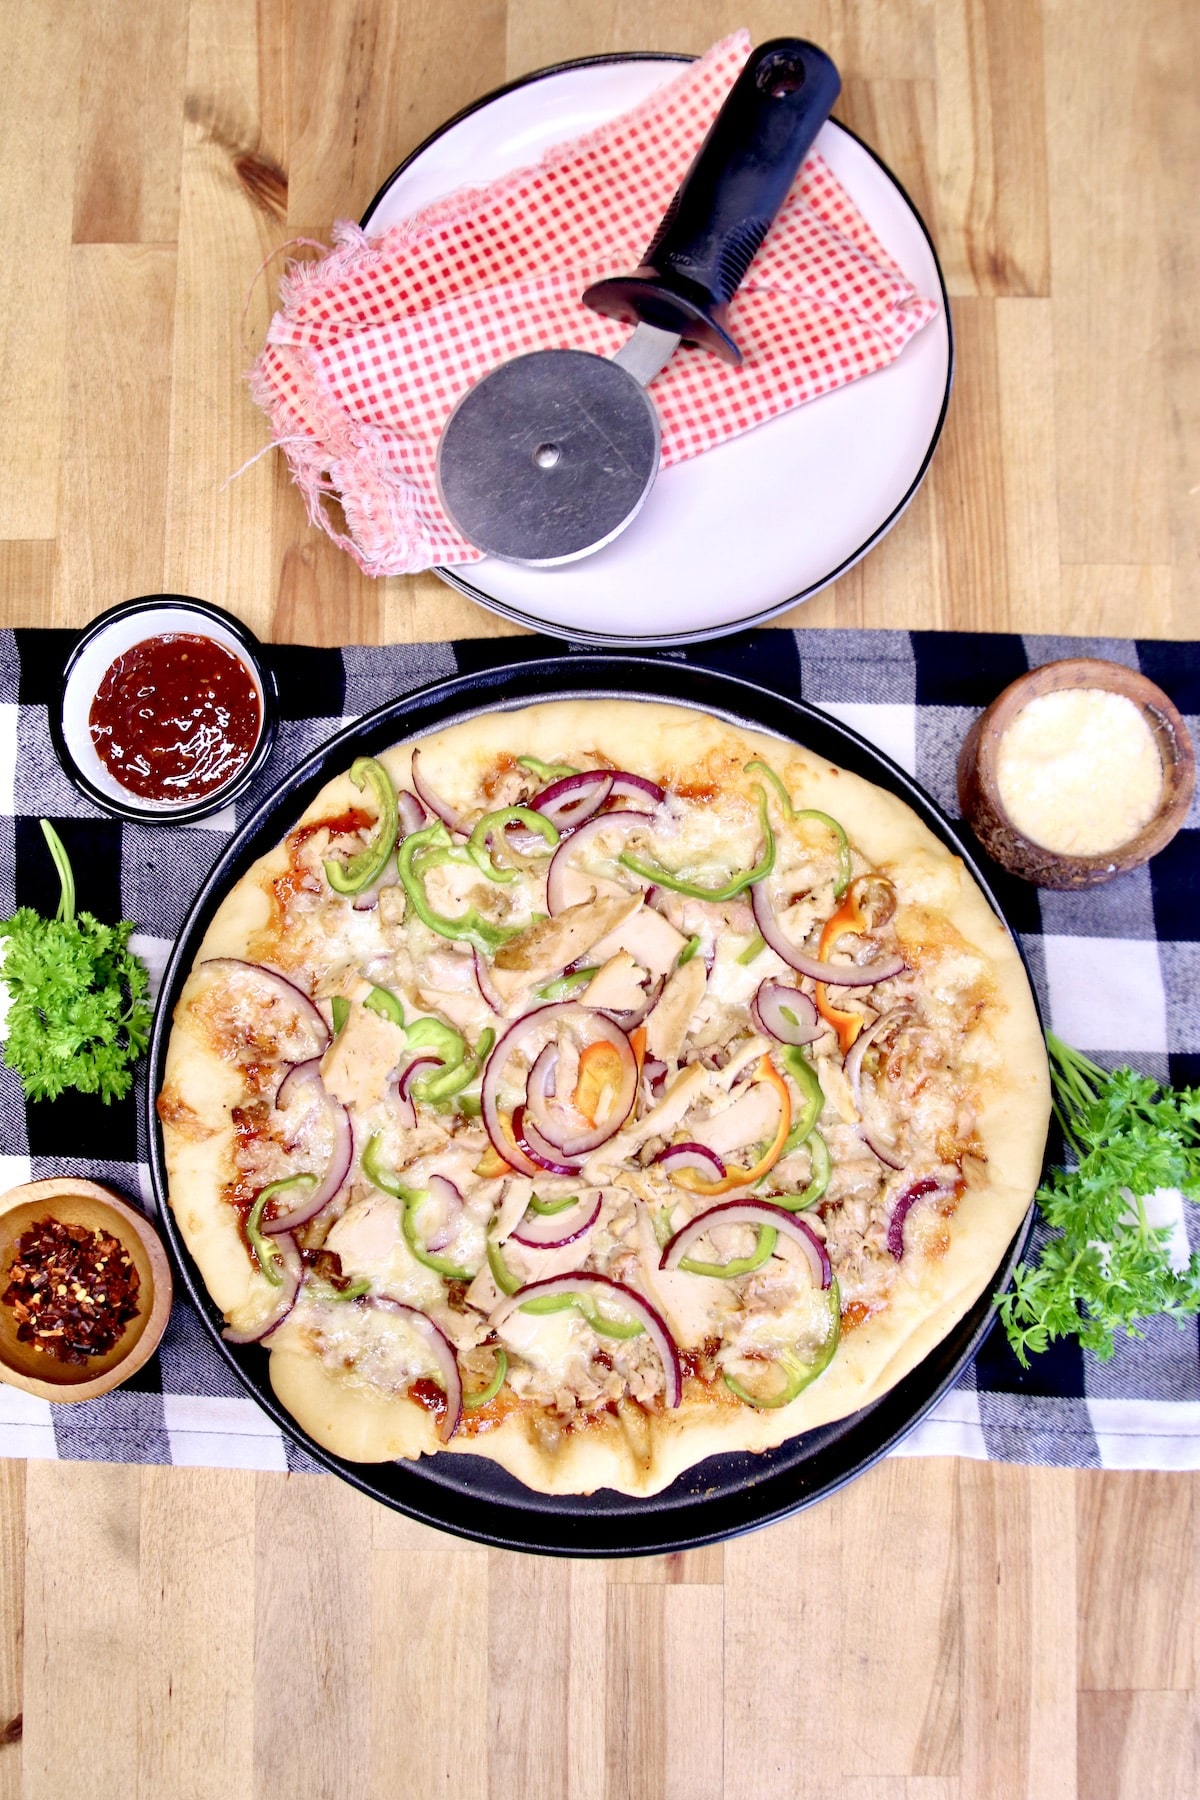 BBQ Chicken pizza on a round pan with plates.